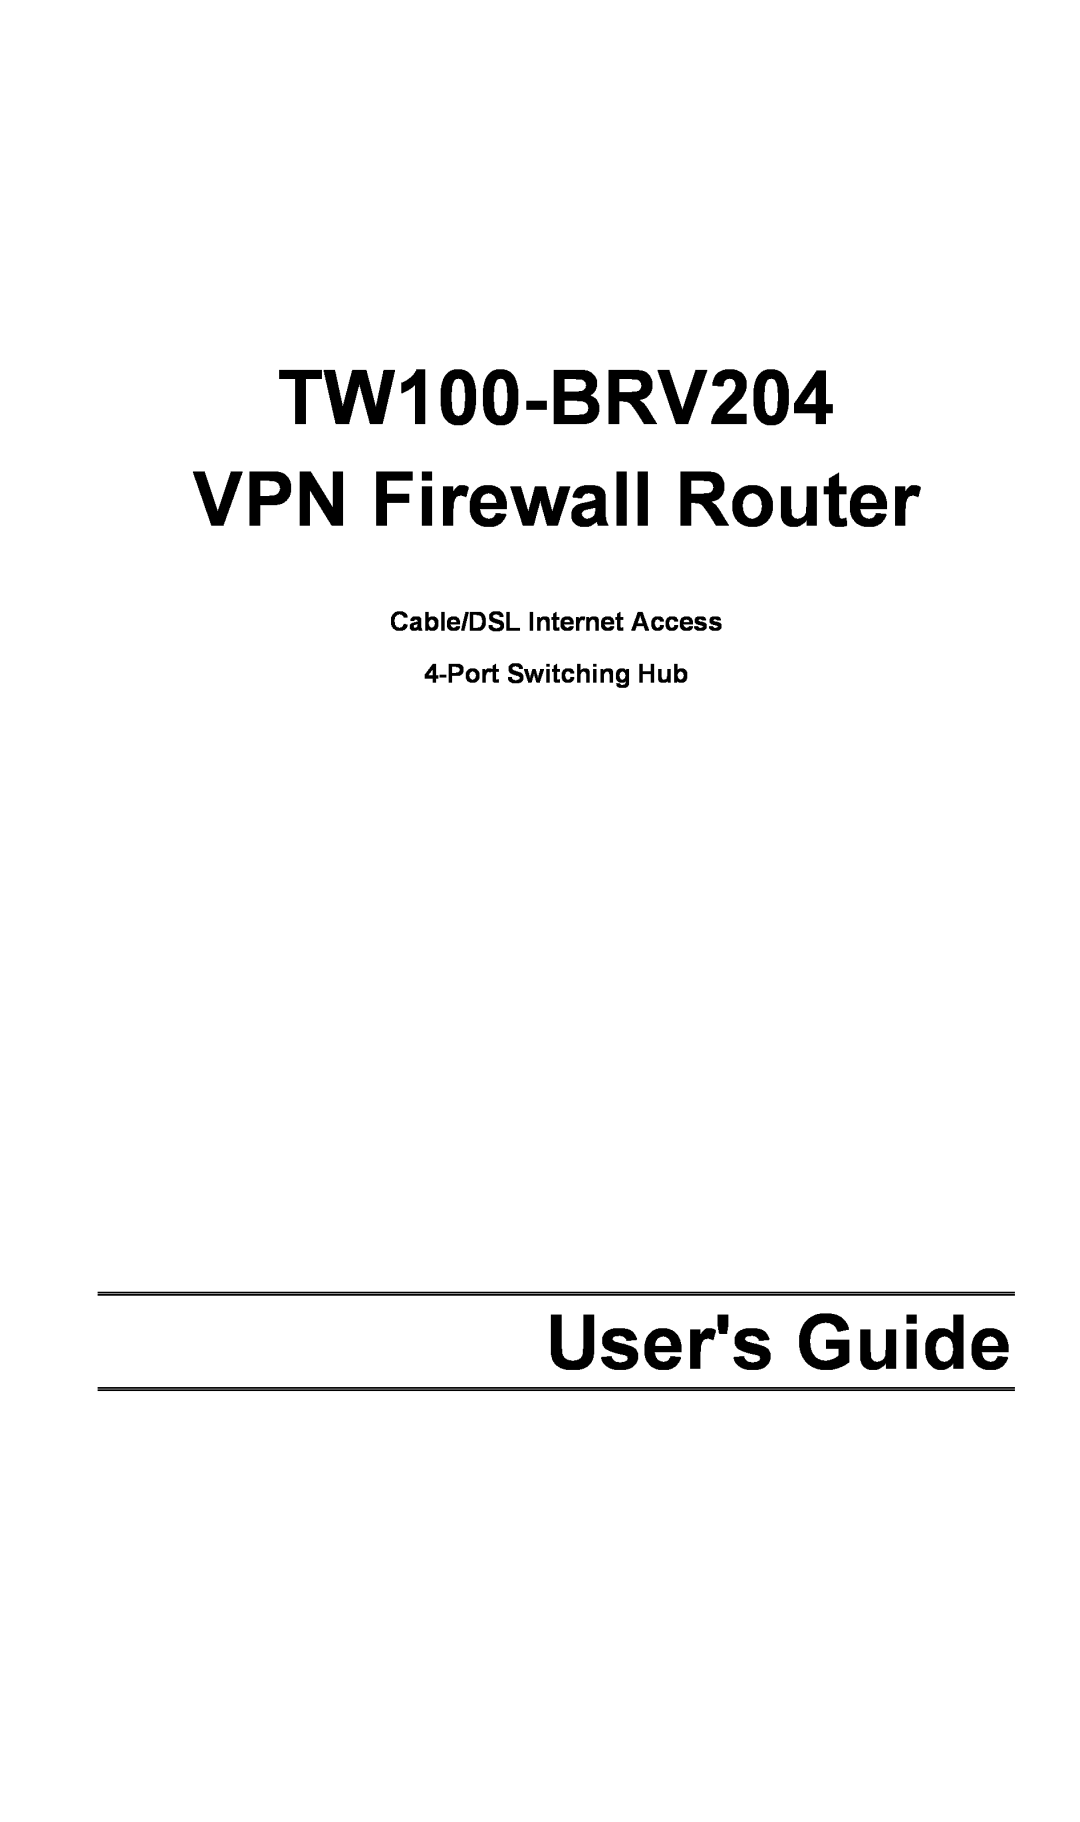 TRENDnet manual TW100-BRV204 VPN Firewall Router, Users Guide, Cable/DSL Internet Access 4-Port Switching Hub 